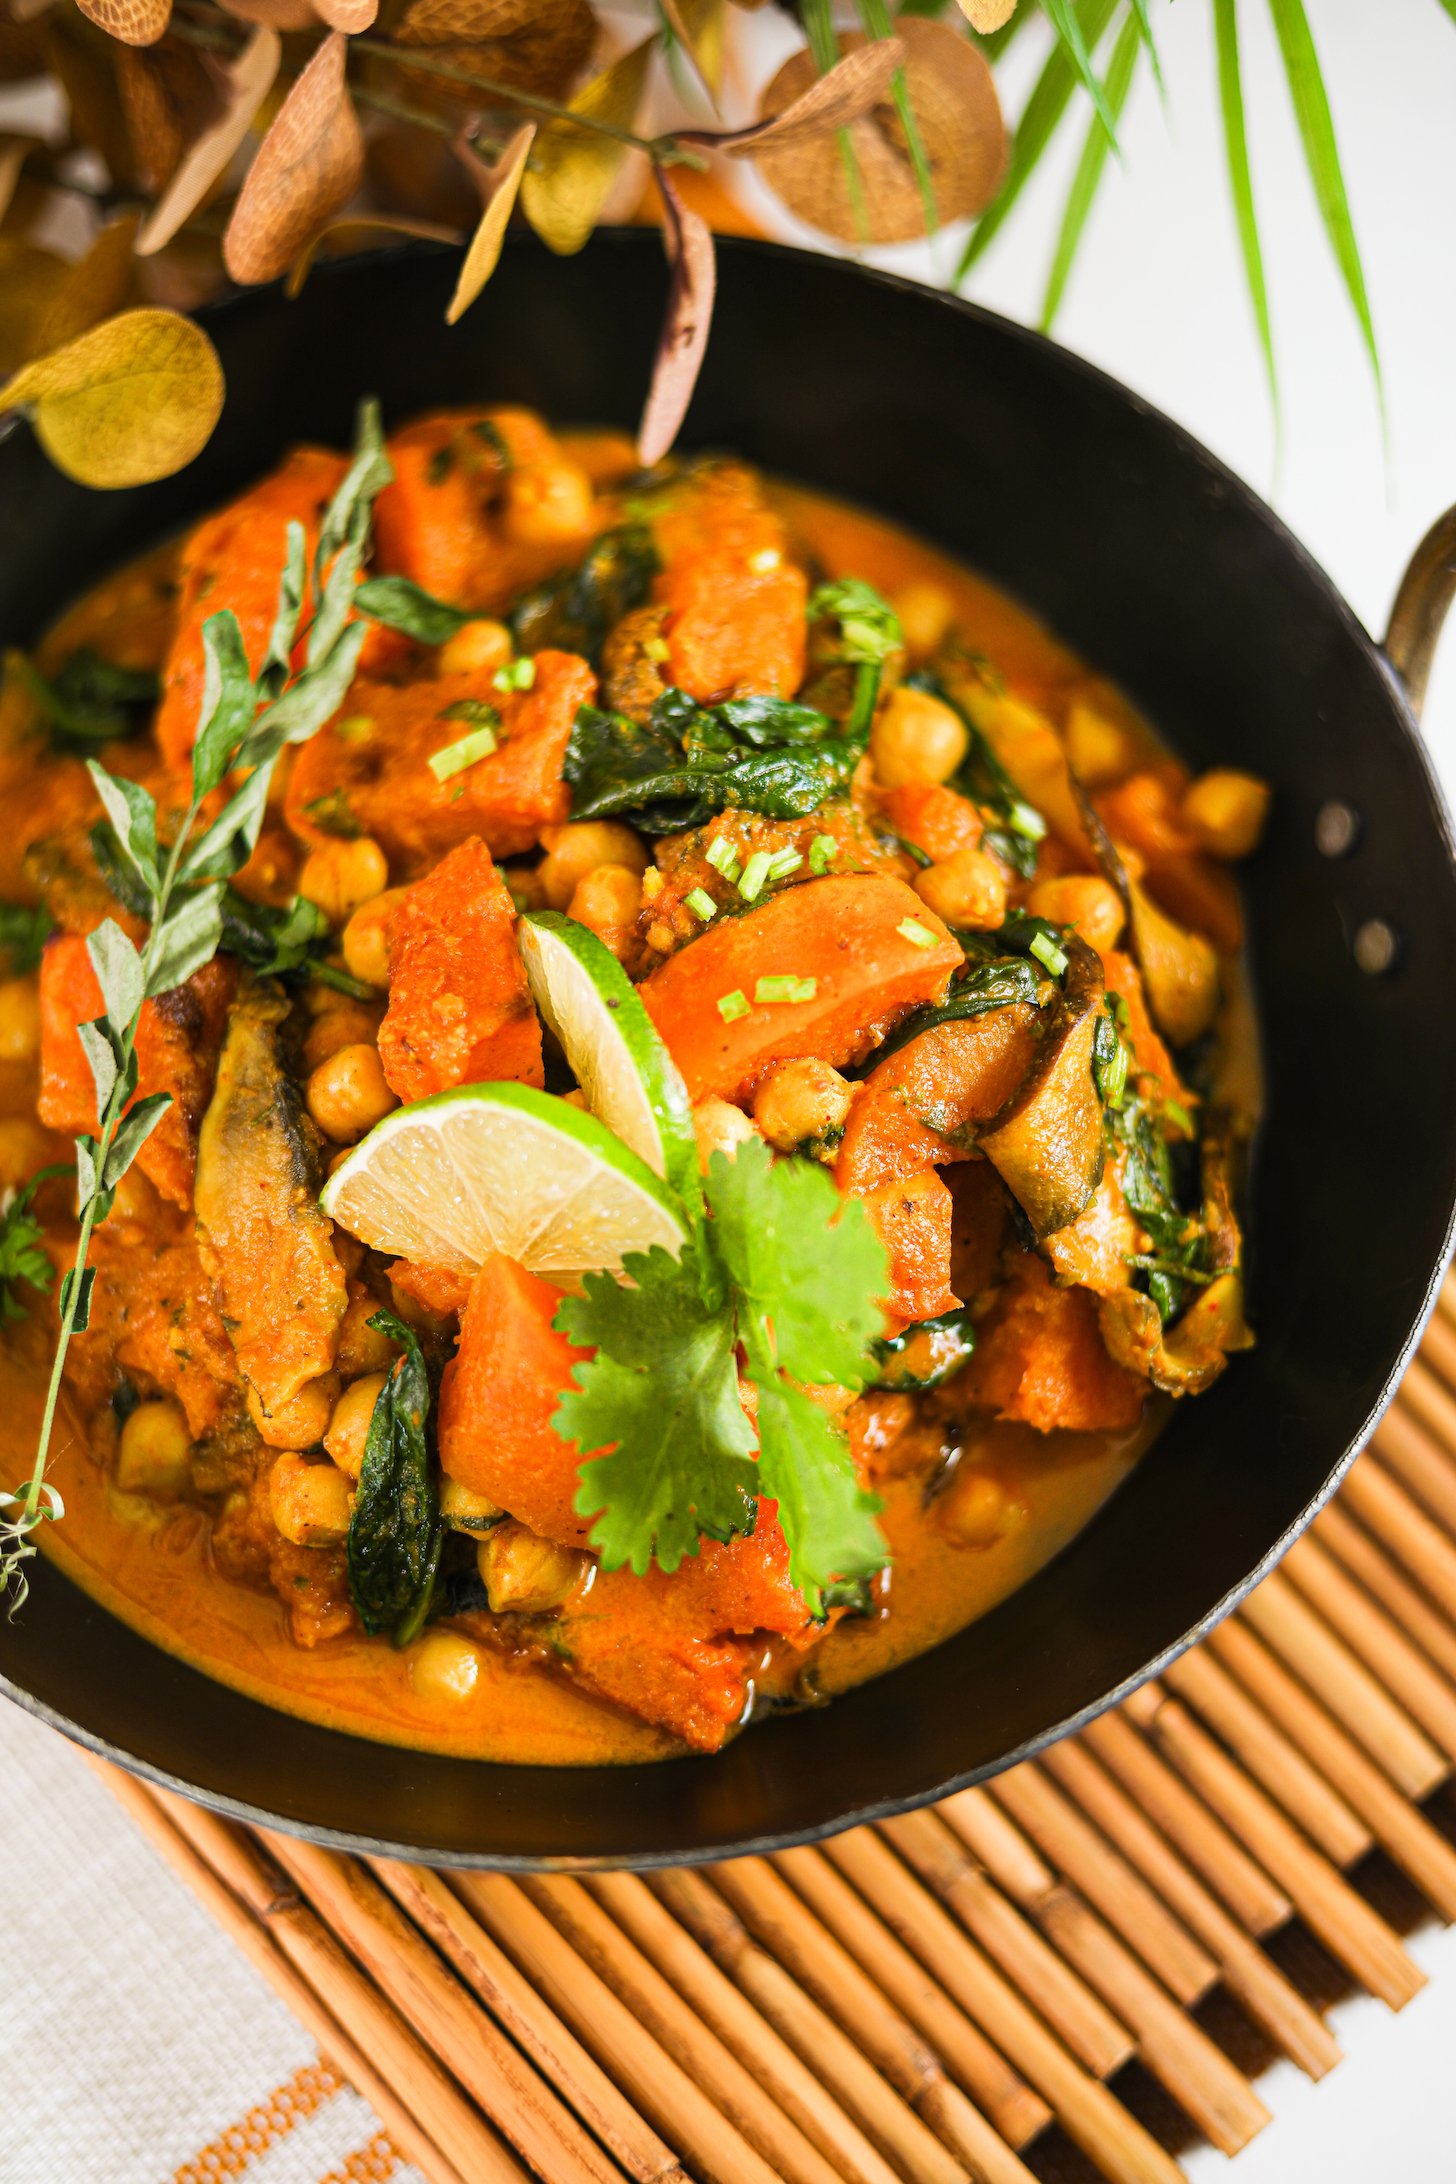 Perspective image of chickpea and squash curry in an Indian wok, topped with lime and cilantro on a bamboo mat.